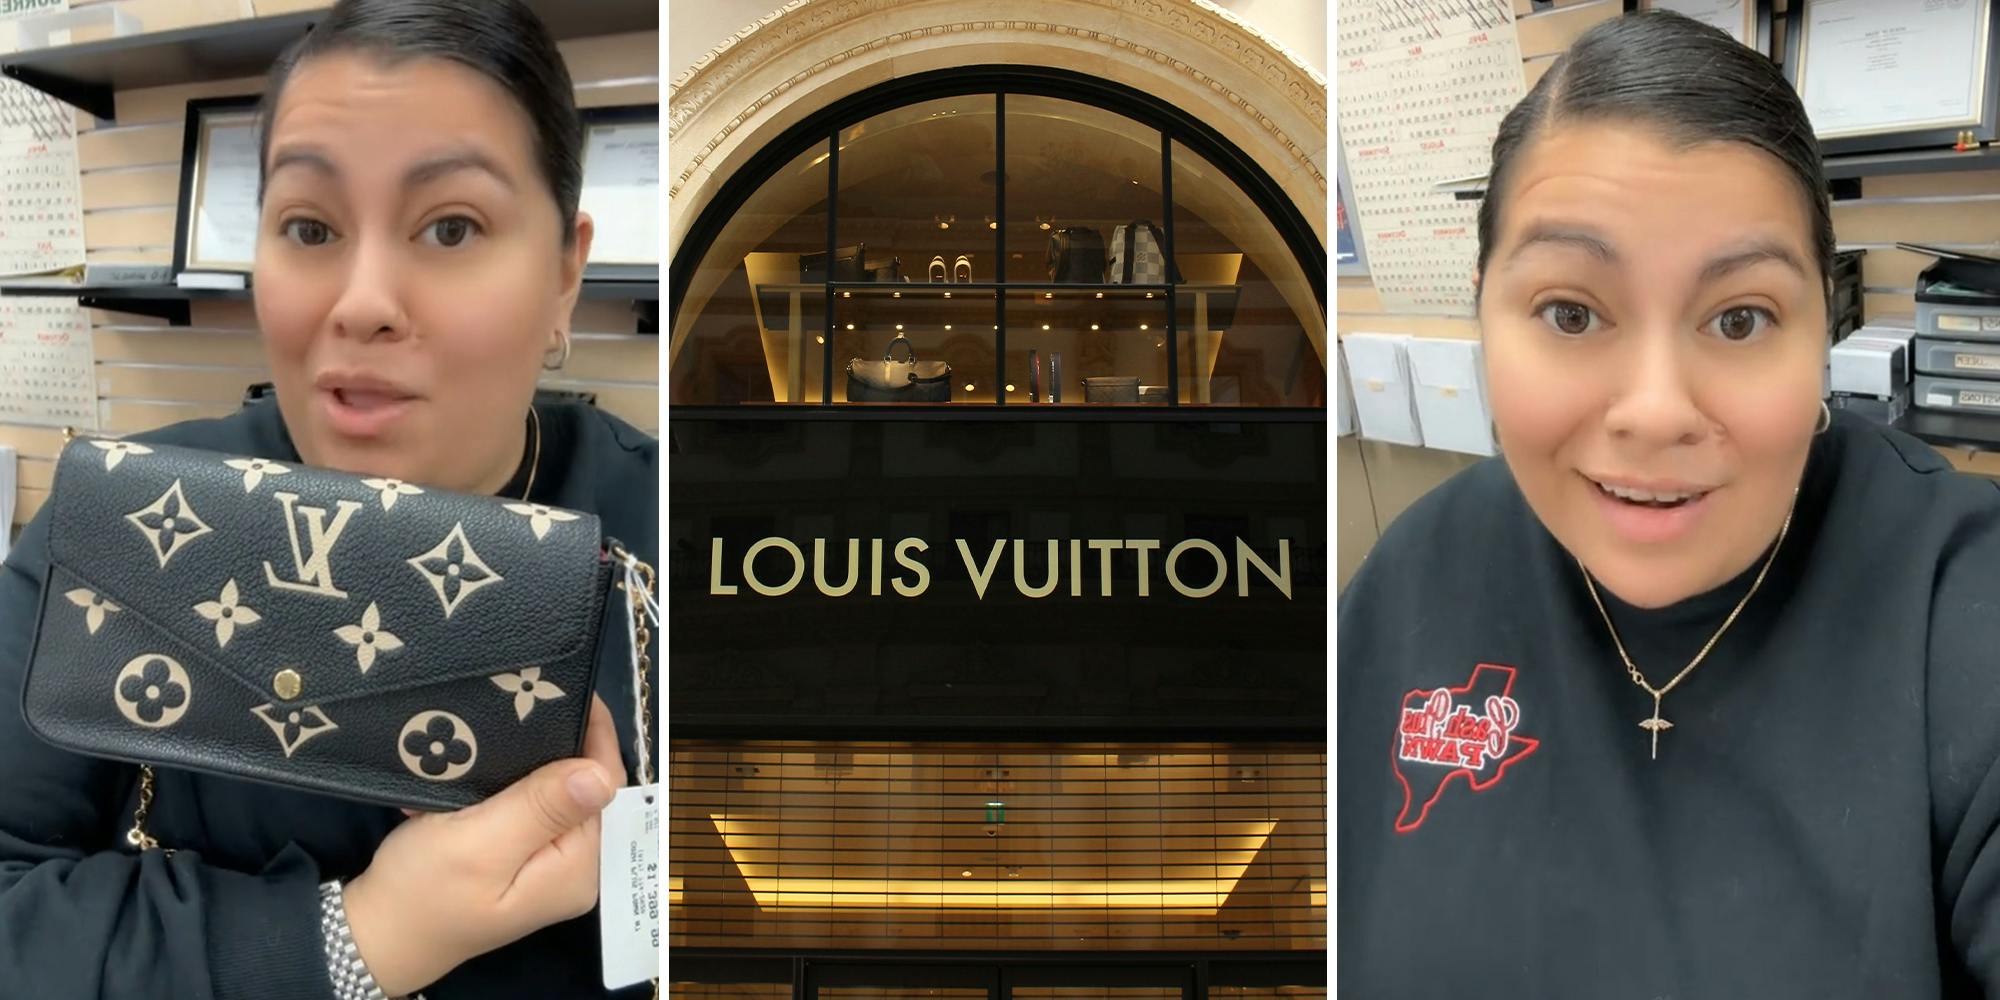 ‘If you don’t know, now you know’: Pawn shop worker says you shouldn’t pawn your Louis Vuitton bag. Here’s why